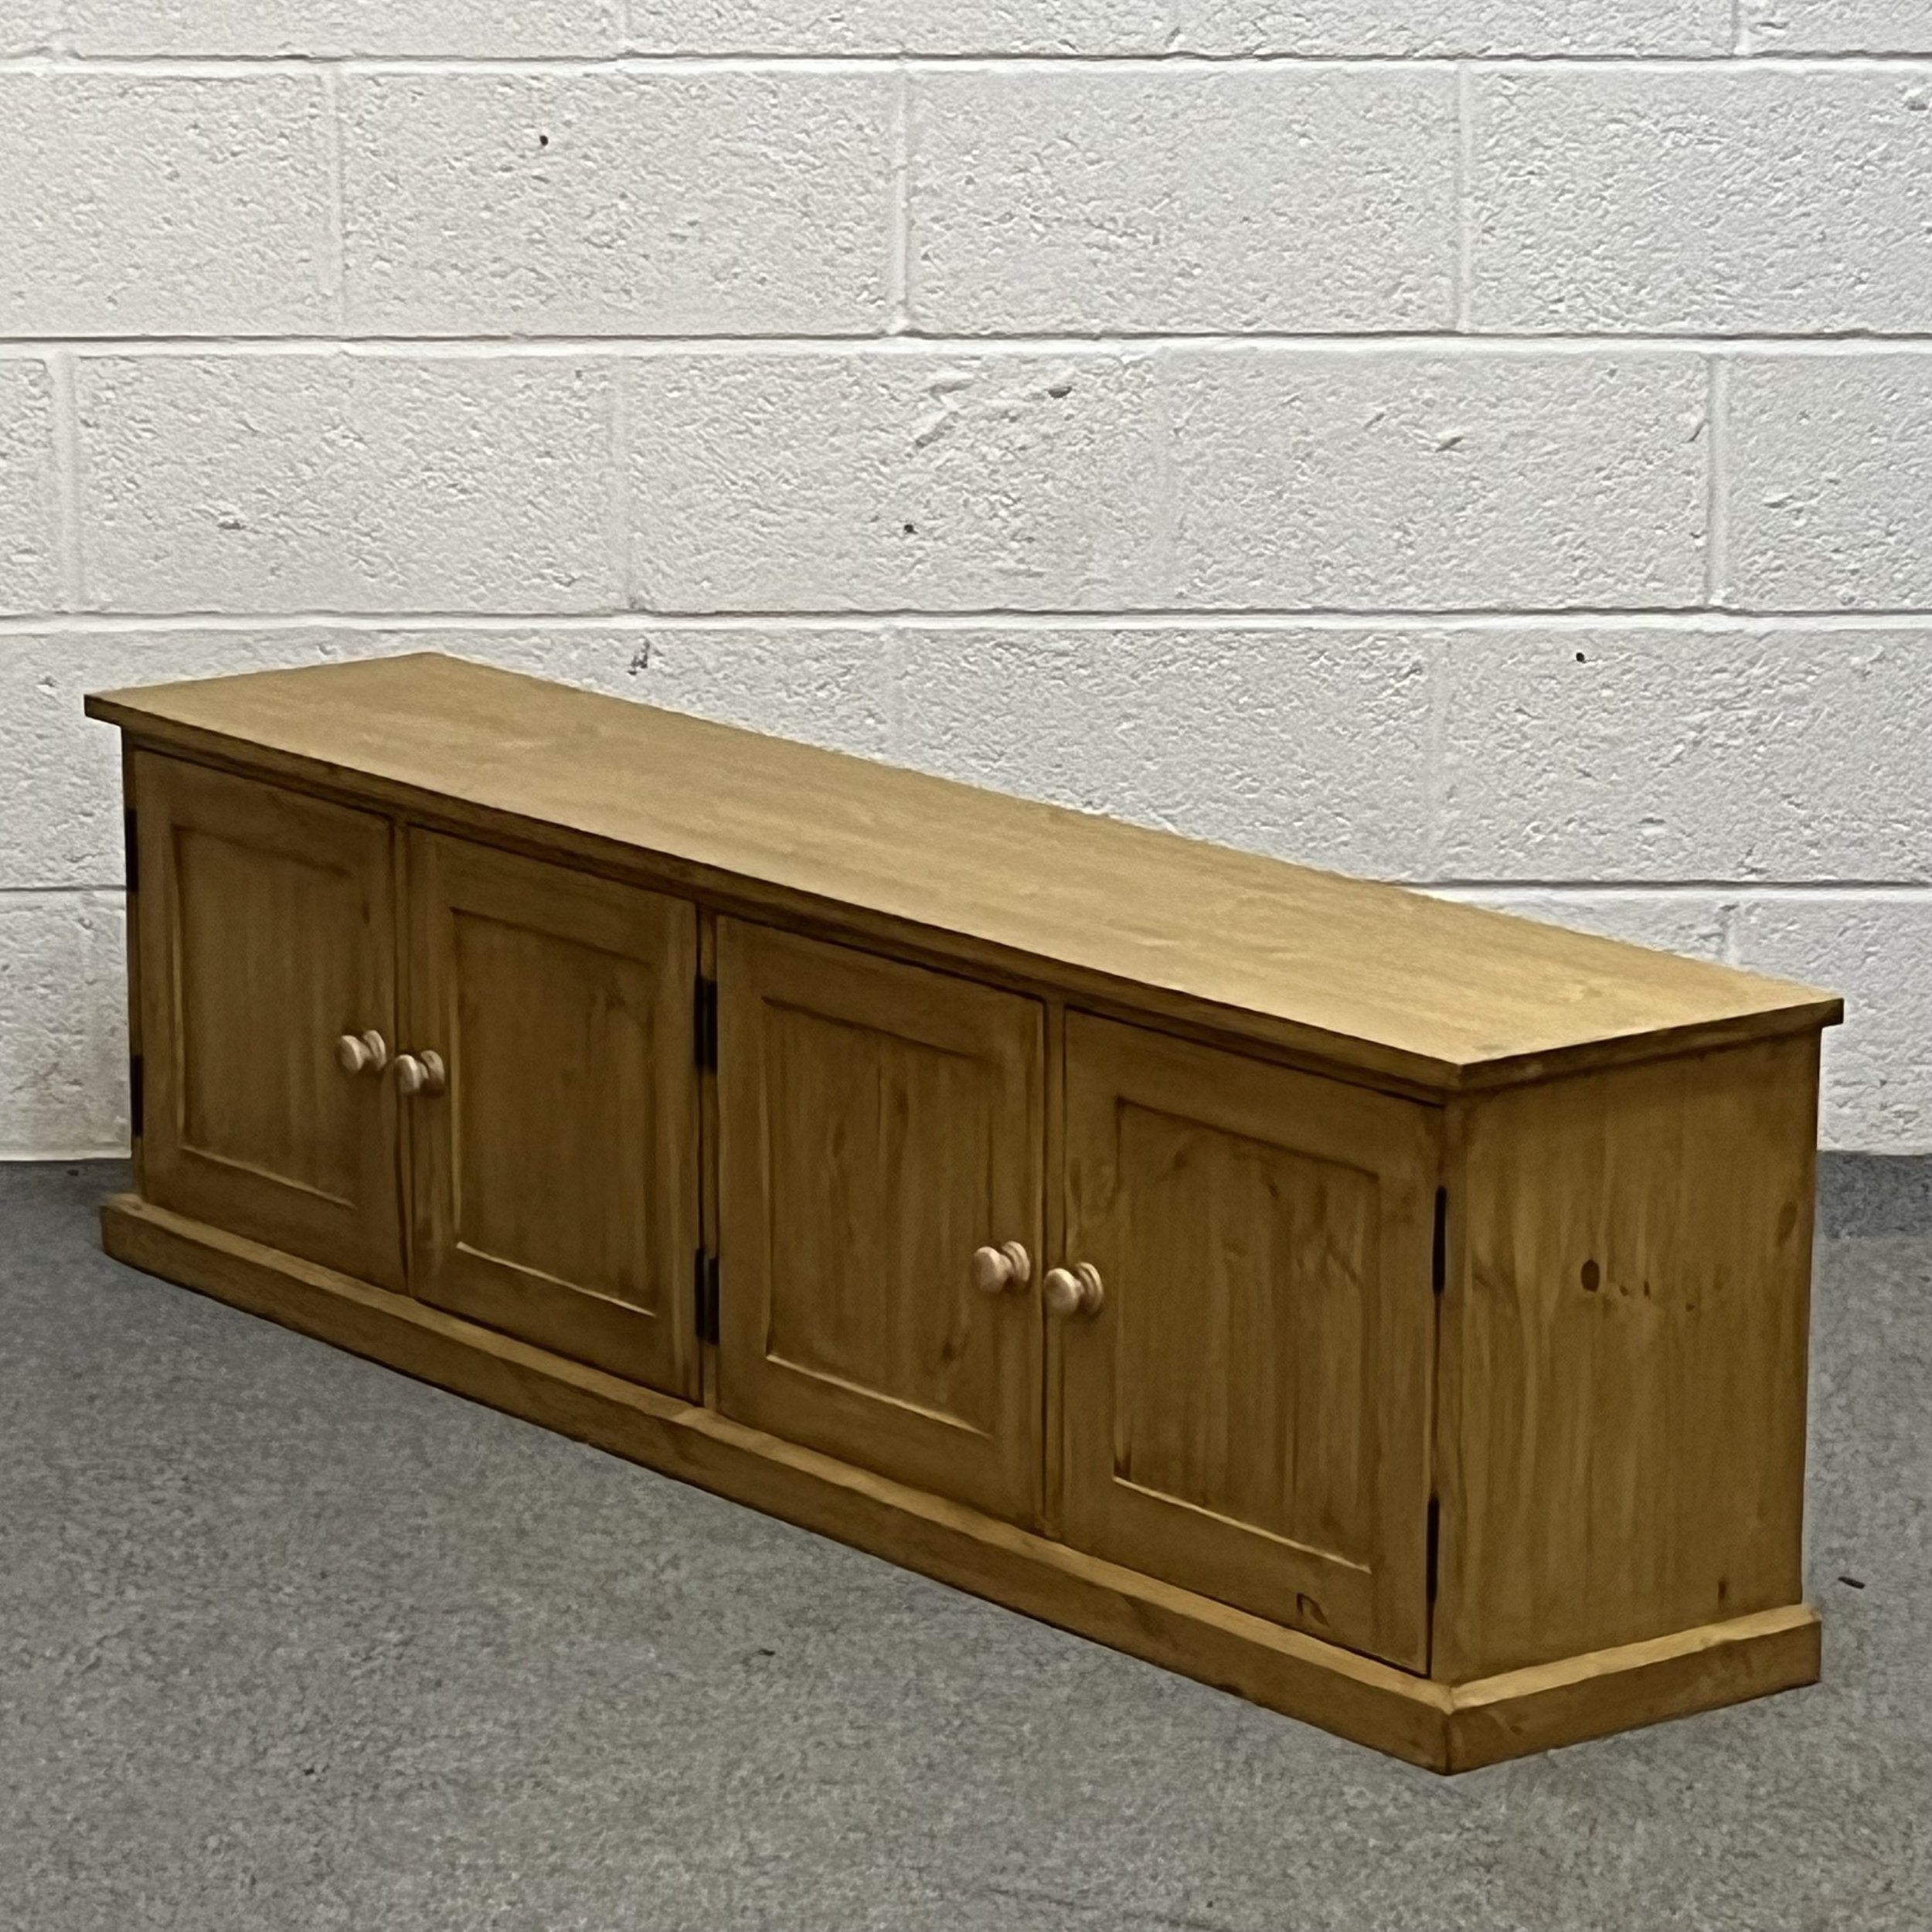 Low, wide pine shoe bench